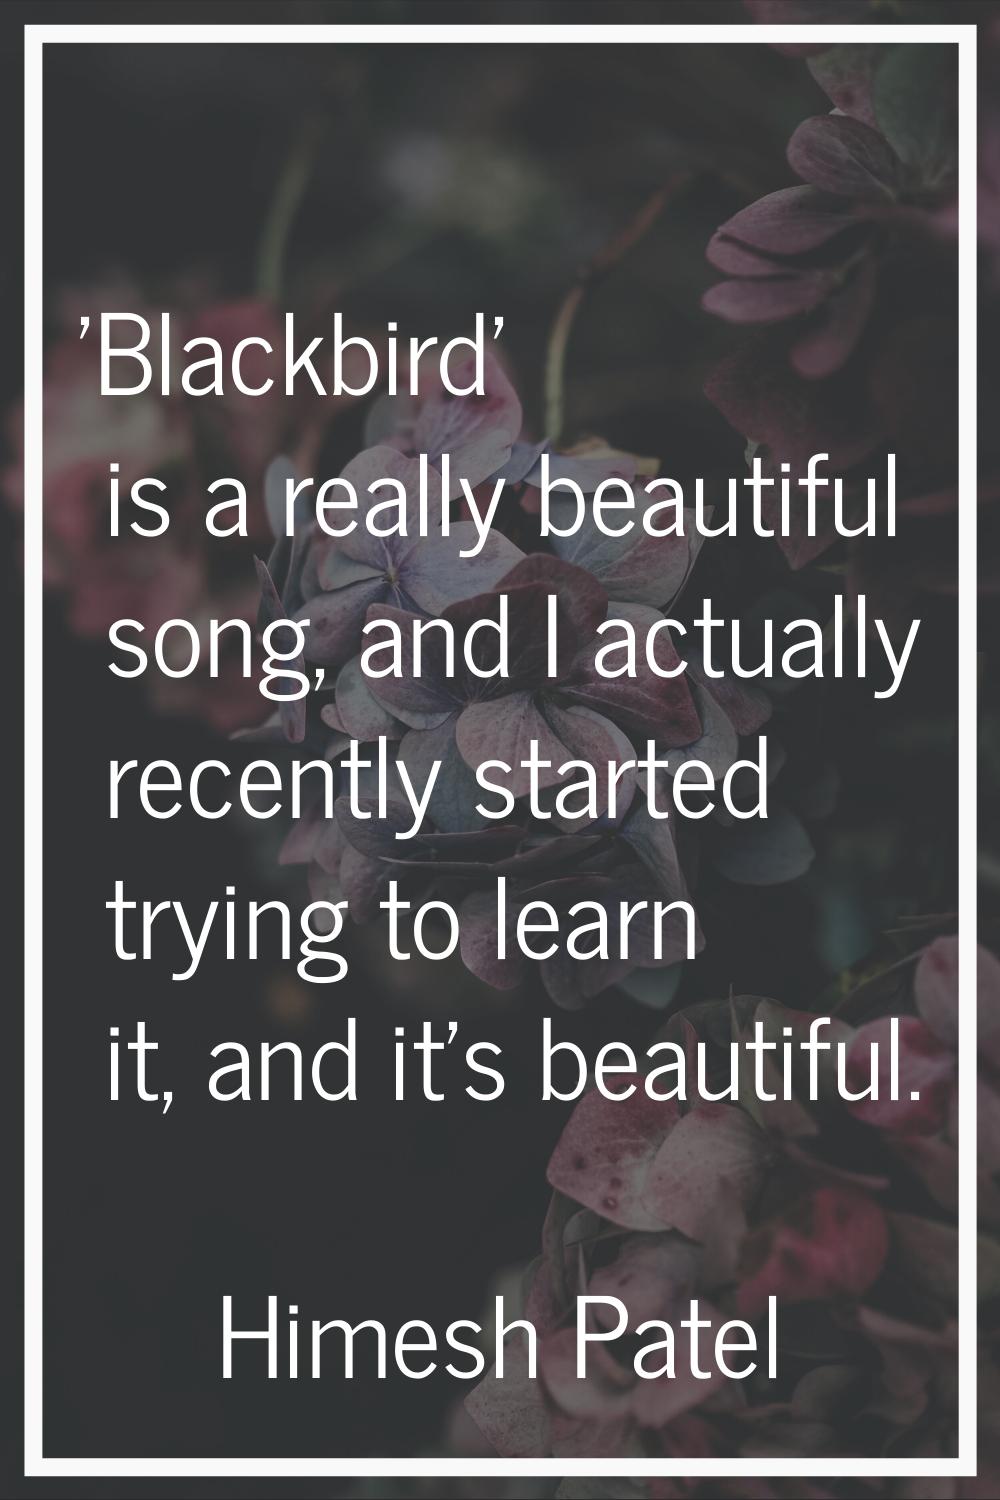 'Blackbird' is a really beautiful song, and I actually recently started trying to learn it, and it'